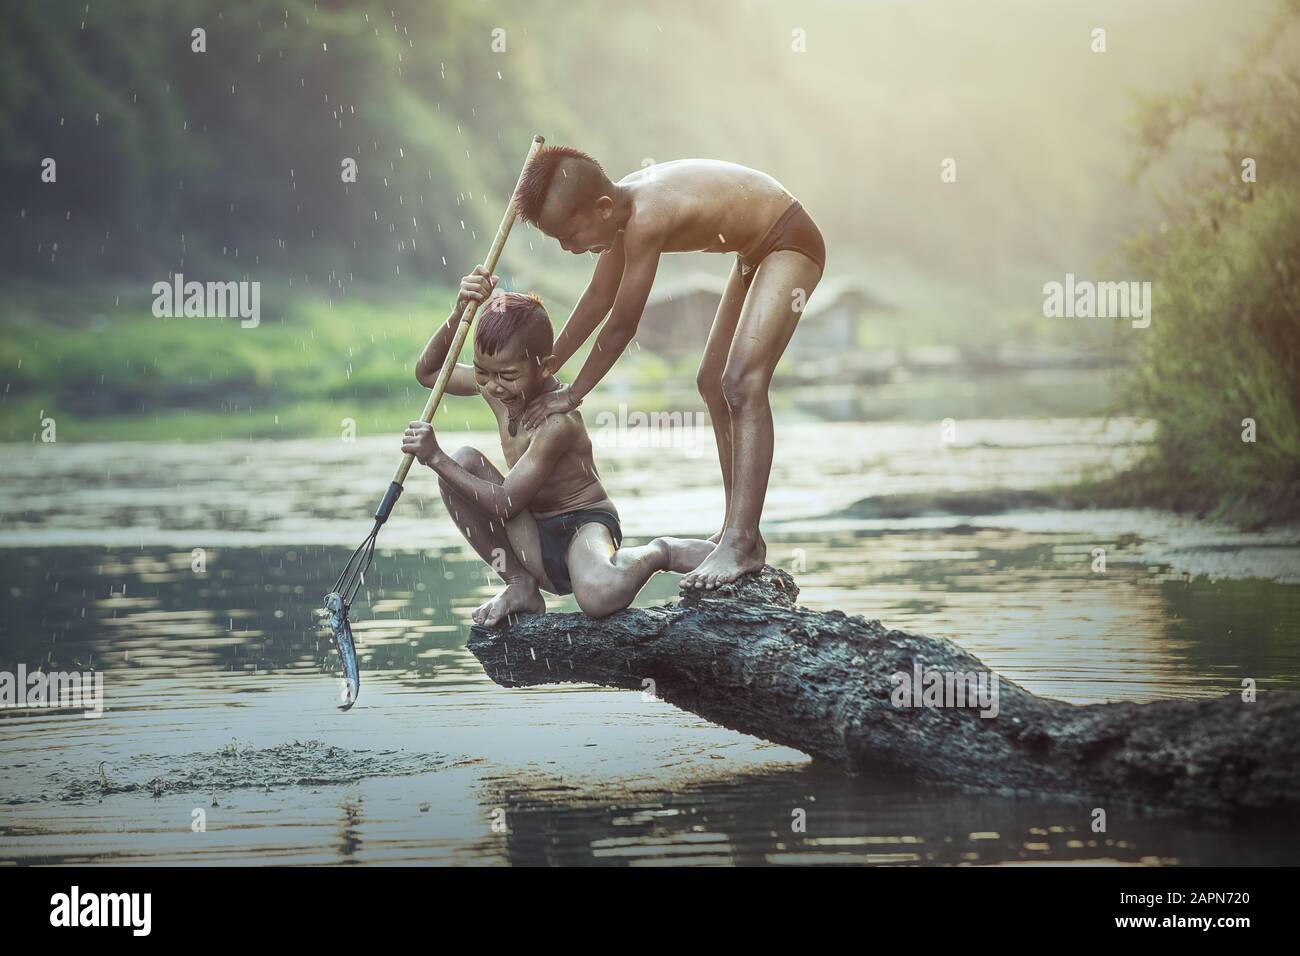 Boy fishing at the river Stock Photo - Alamy